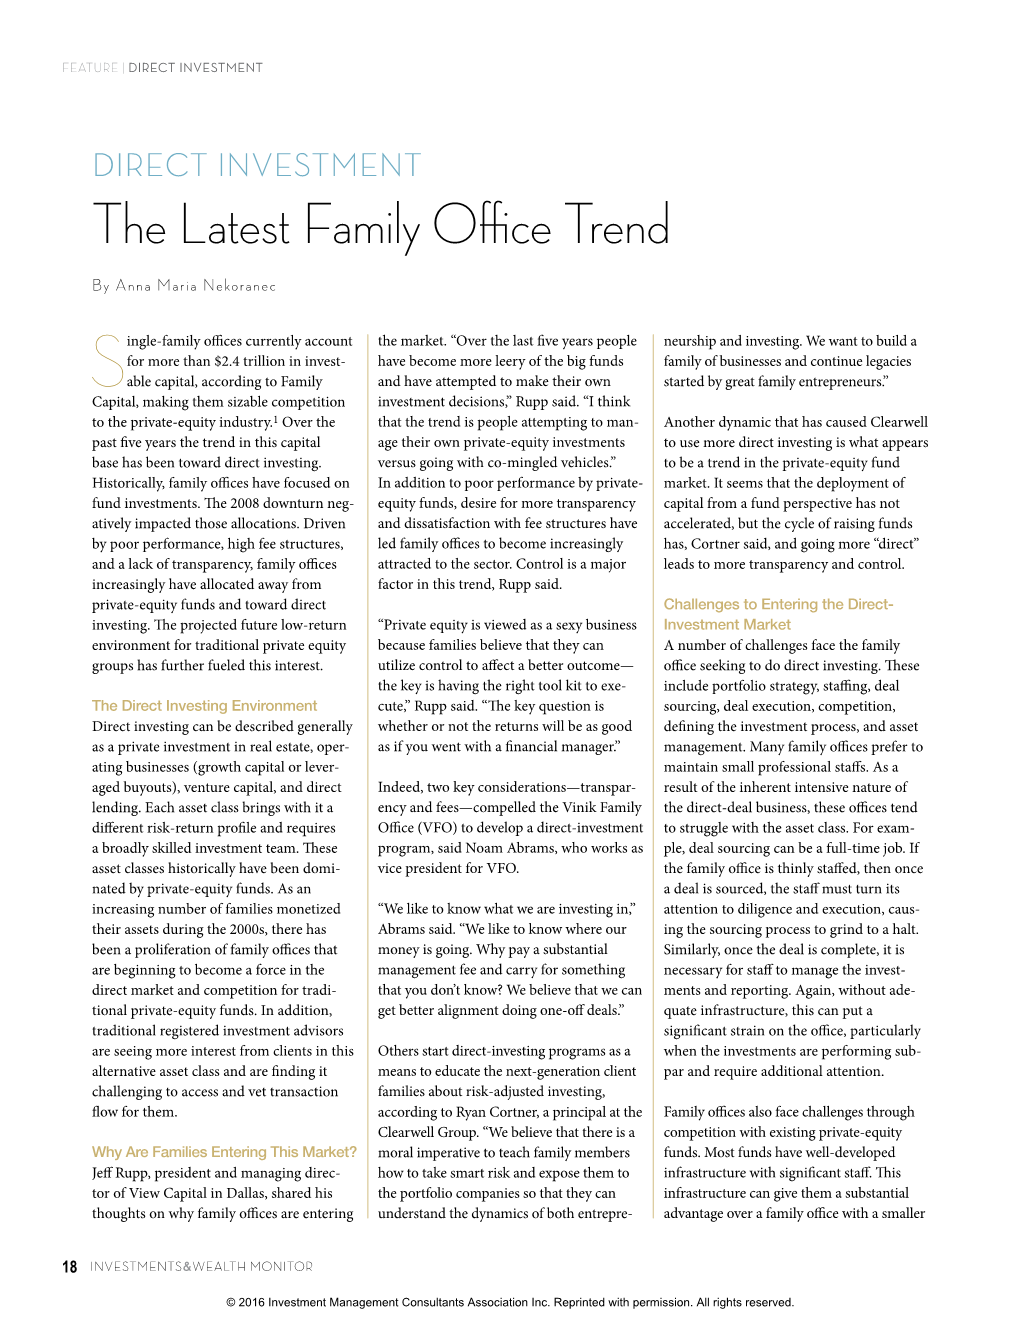 The Latest Family Office Trend